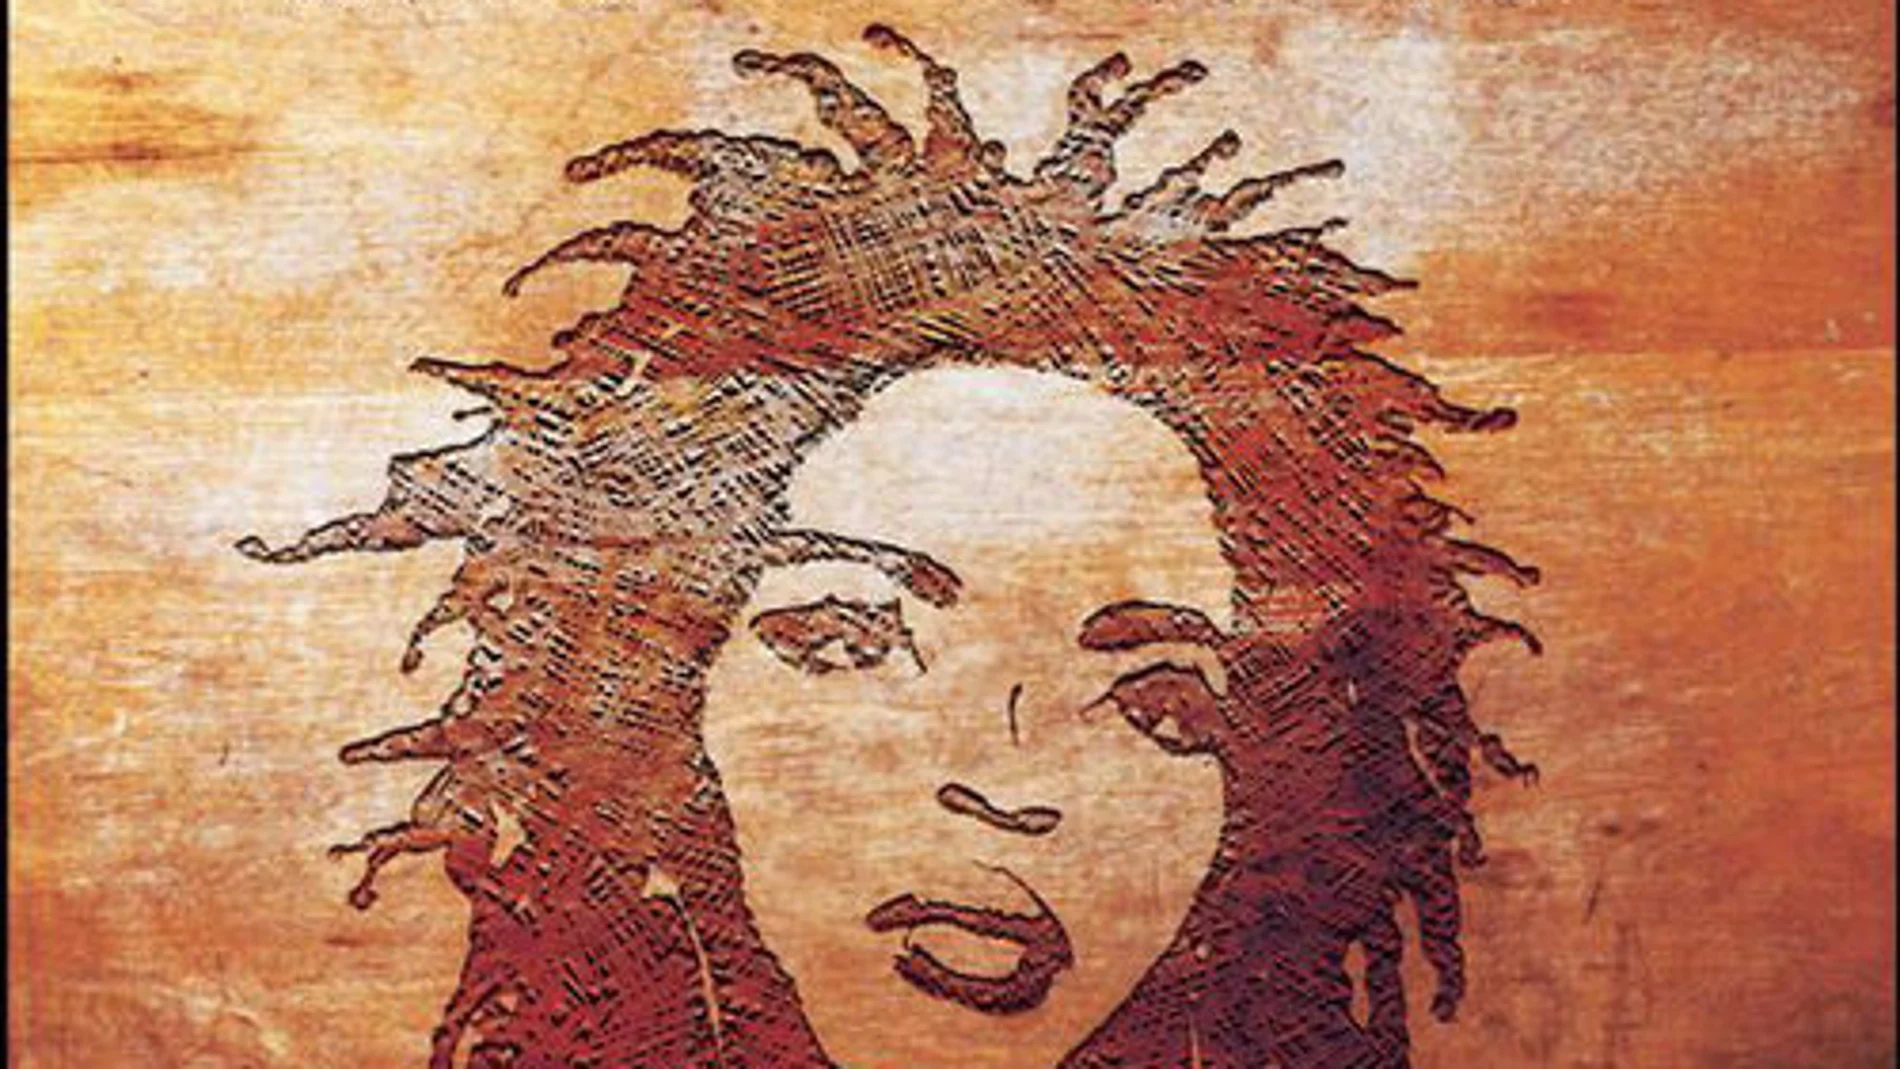 Lauryn Hill The Miseducation of Lauryn Hill (Ruffhouse_Columbia, 1998)